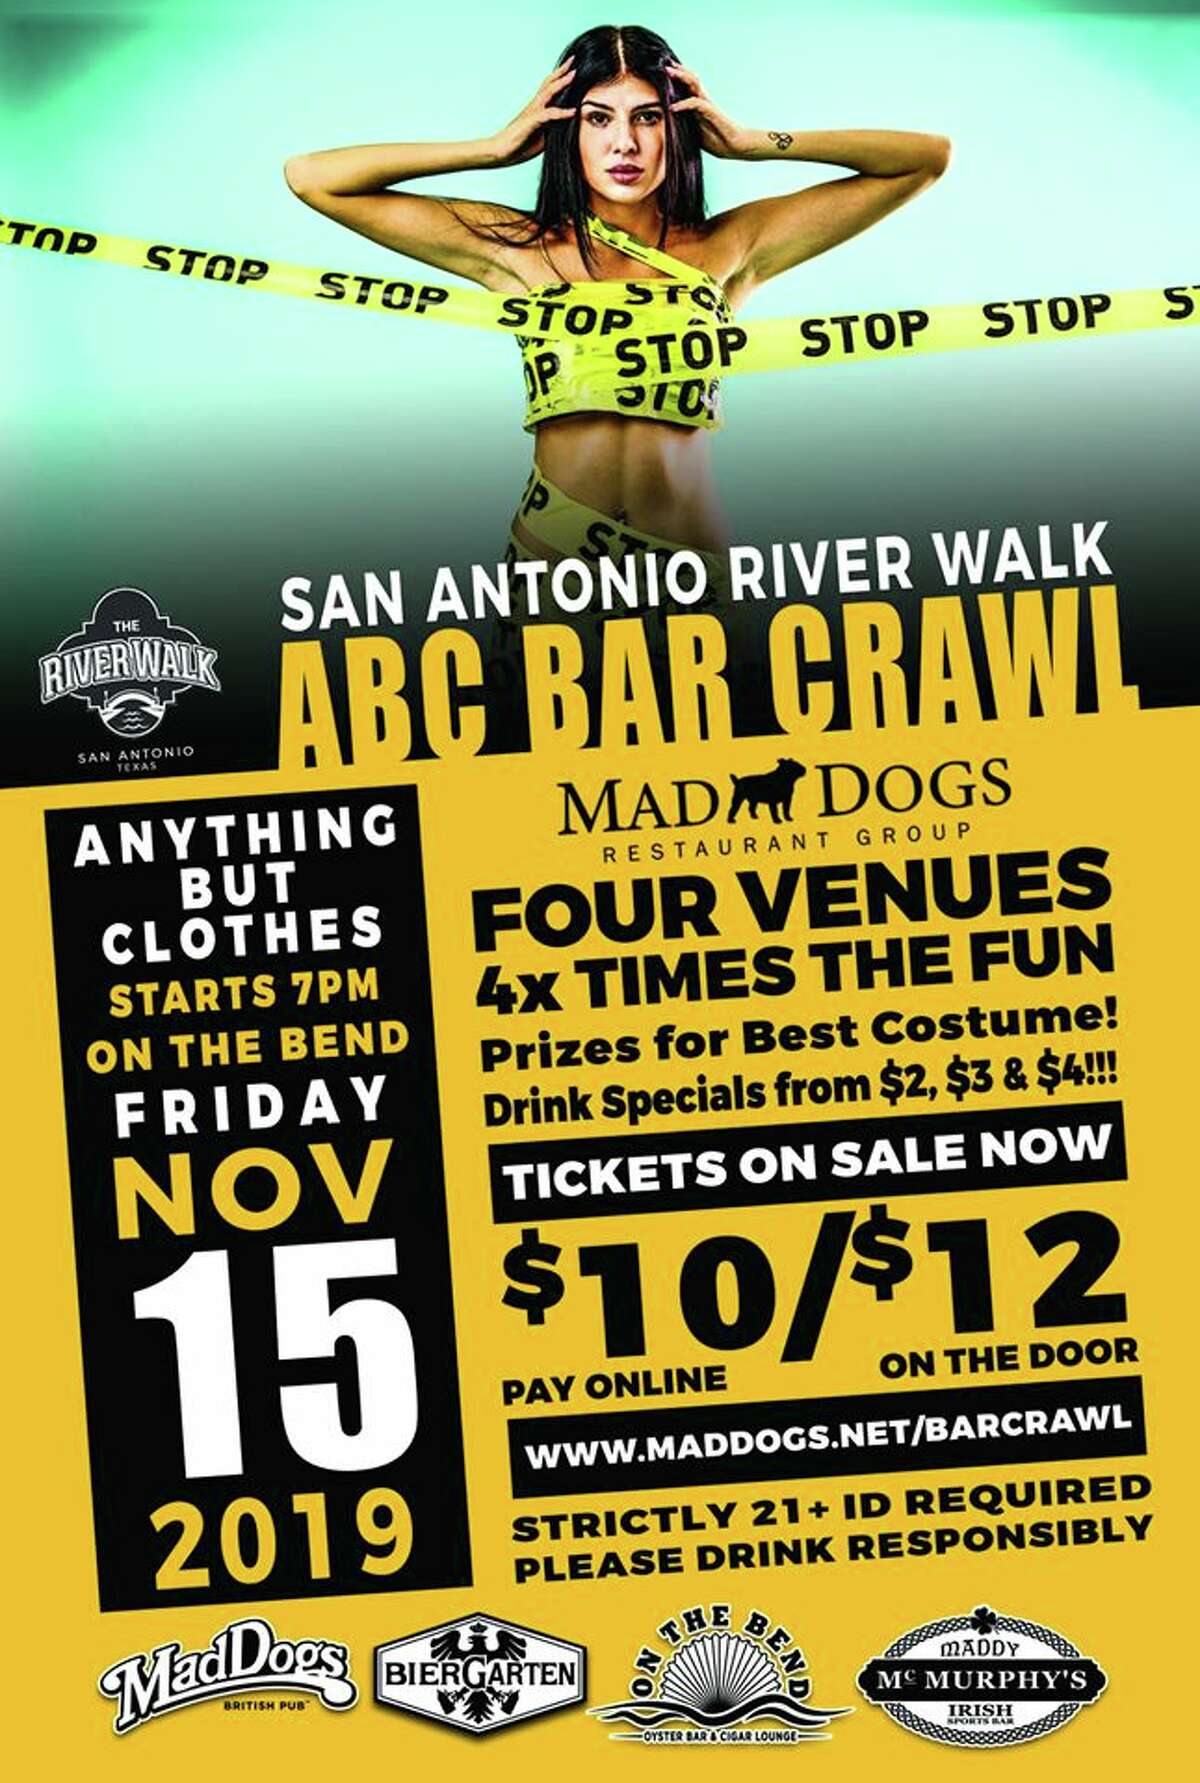 The San Antonio Riverwalk and Maddy McMurphy's Irish Sports Bar, previously The Ticket, are hosting the 21-and-up Anything But Clothes Bar Crawl on Friday from 7 p.m. to midnight.